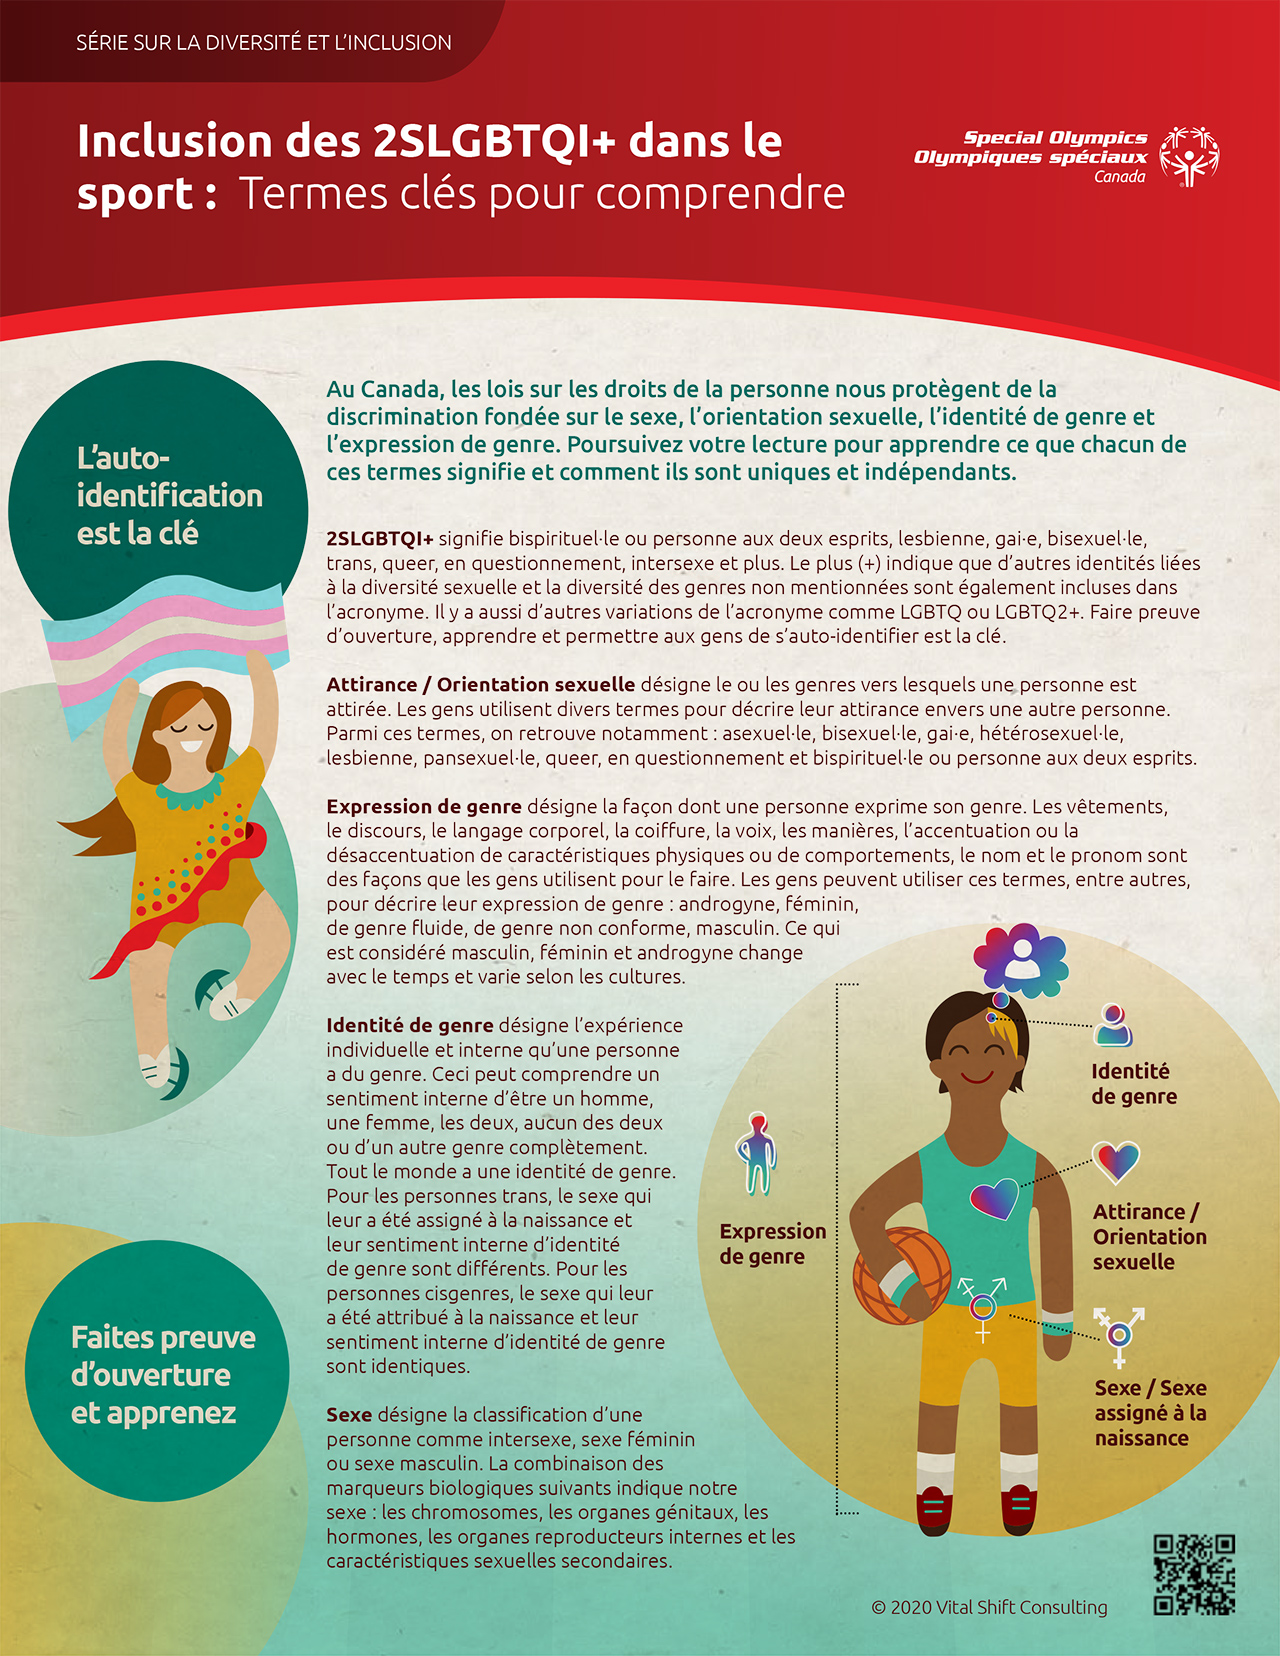 2SLGBTQI+ Inclusion in Sport: Key Terms